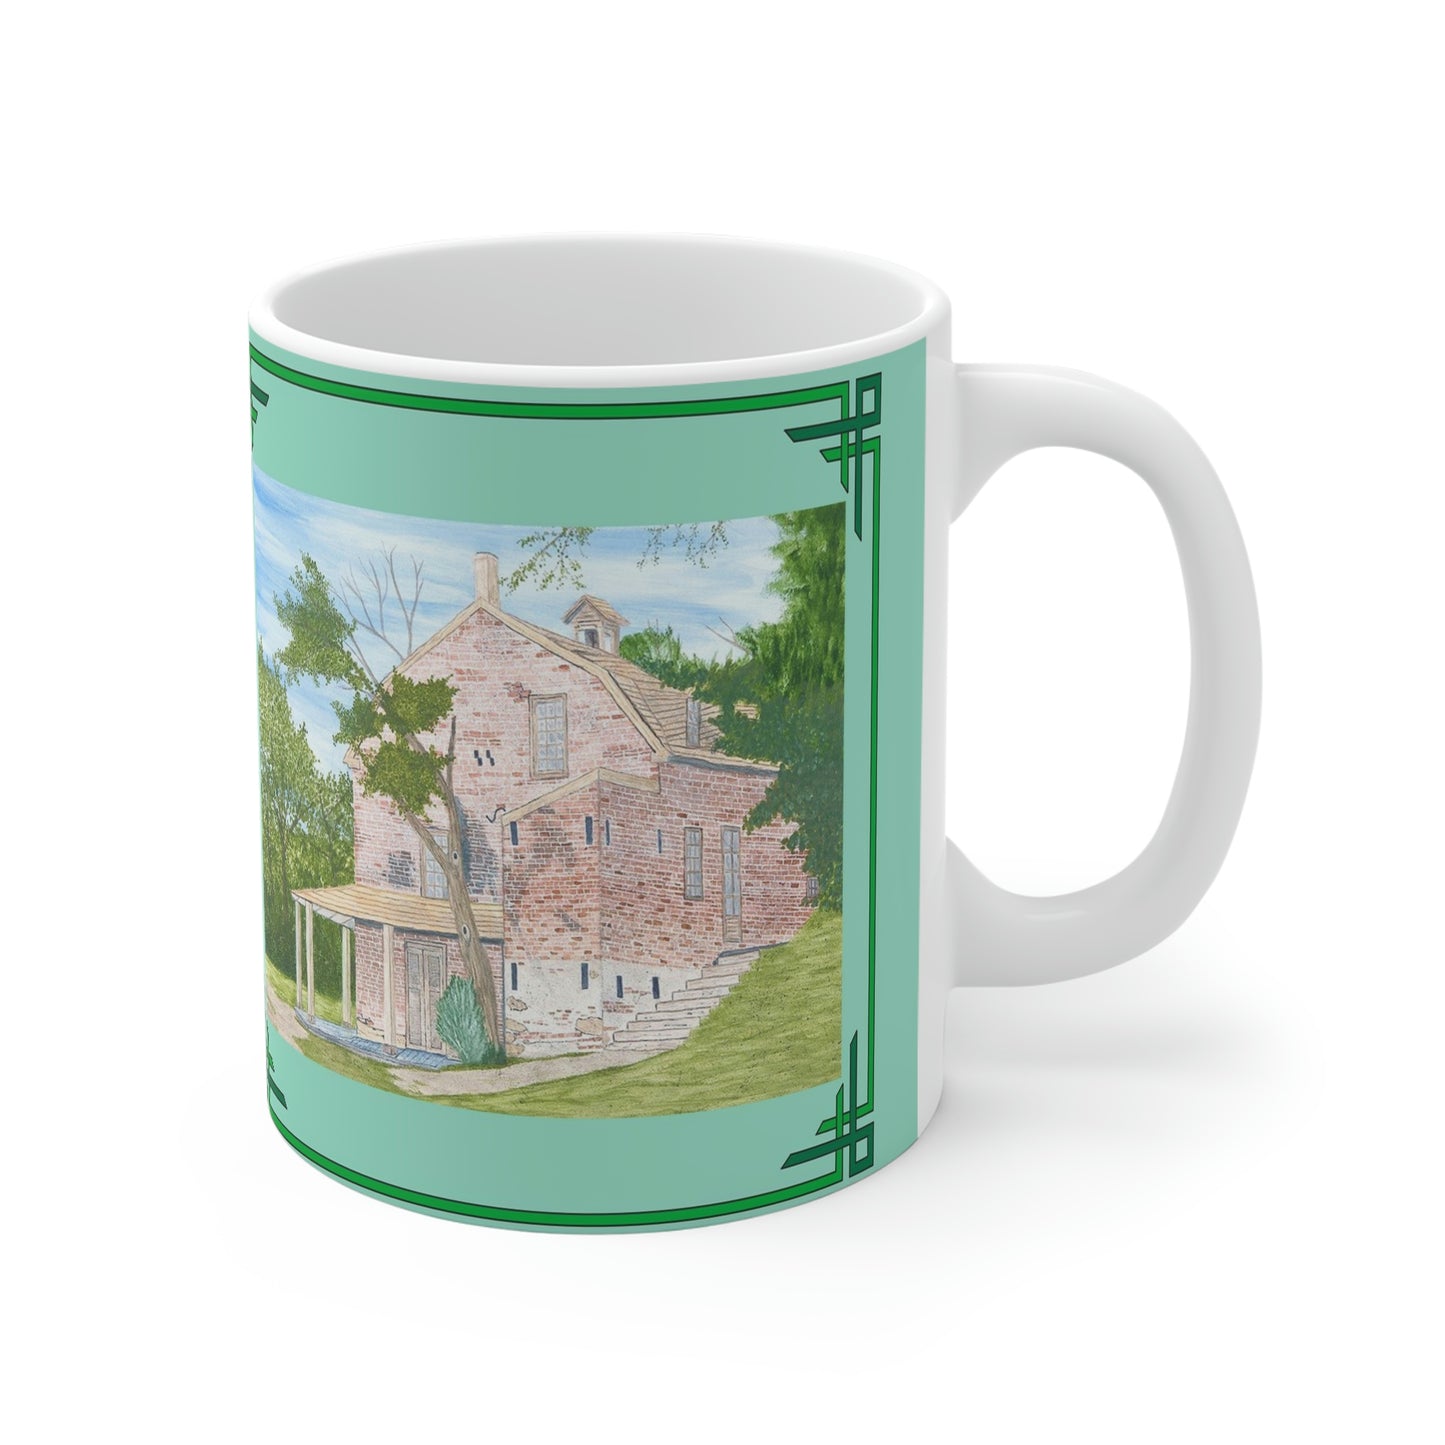 The General Store in New Jersey’s Basto Village State Park recalls a bygone day when the general store was the center of community activity. Enjoy a cup of Coffee, Tea or Hot Chocolate as you gaze at this delightful scene!   The General Store image is framed in Spring green to capture the beauty of the General Store in the freshness of the new season.  The mug image is a reproduction of an original watercolor by Lee M. Buchanan.